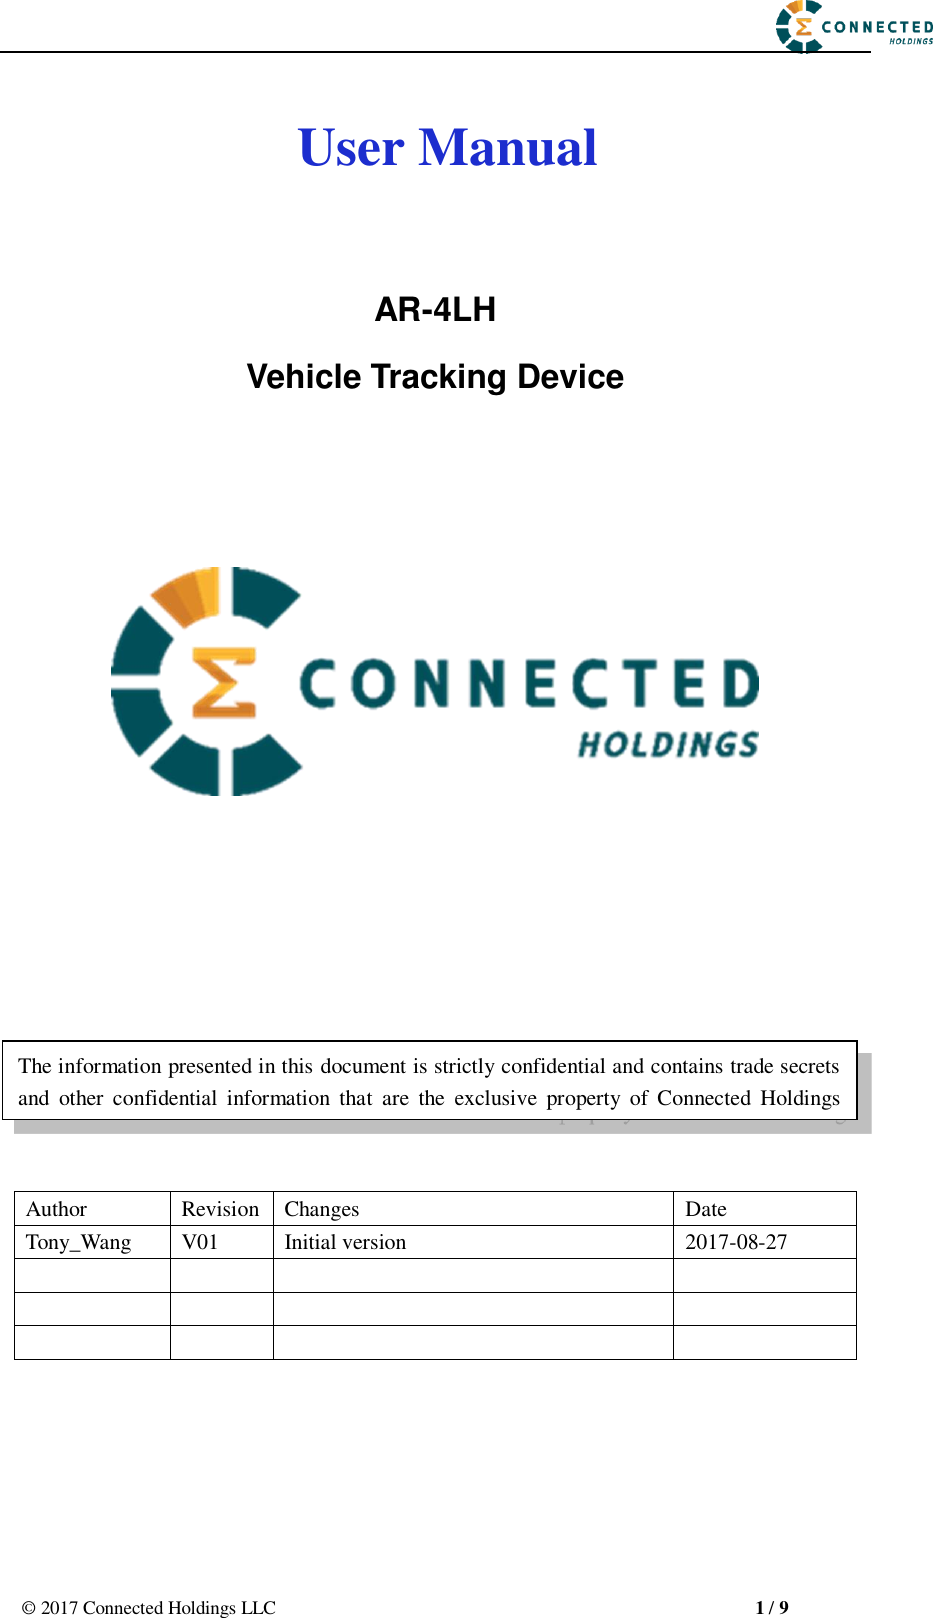                                                       ©  2017 Connected Holdings LLC                                                   1 / 9    User Manual   AR-4LH Vehicle Tracking Device                  Author Revision Changes Date Tony_Wang V01 Initial version 2017-08-27             The information presented in this document is strictly confidential and contains trade secrets and  other  confidential  information  that  are  the  exclusive  property  of  Connected  Holdings 